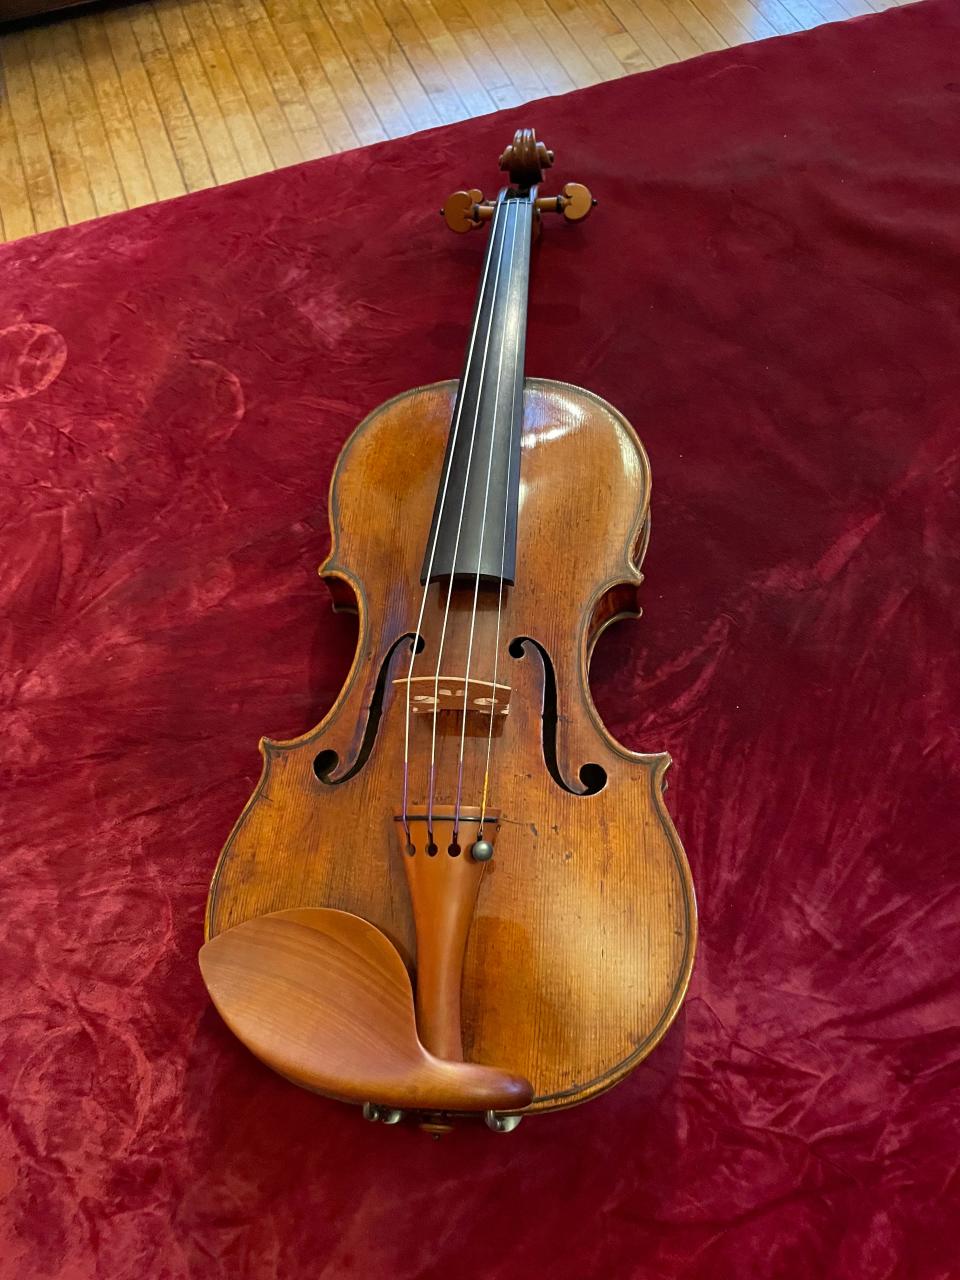 The 1709-1710 violin made by Francesco Gobetti recently acquired by ProMusica was made possible by an anonymous donation of $1 million.